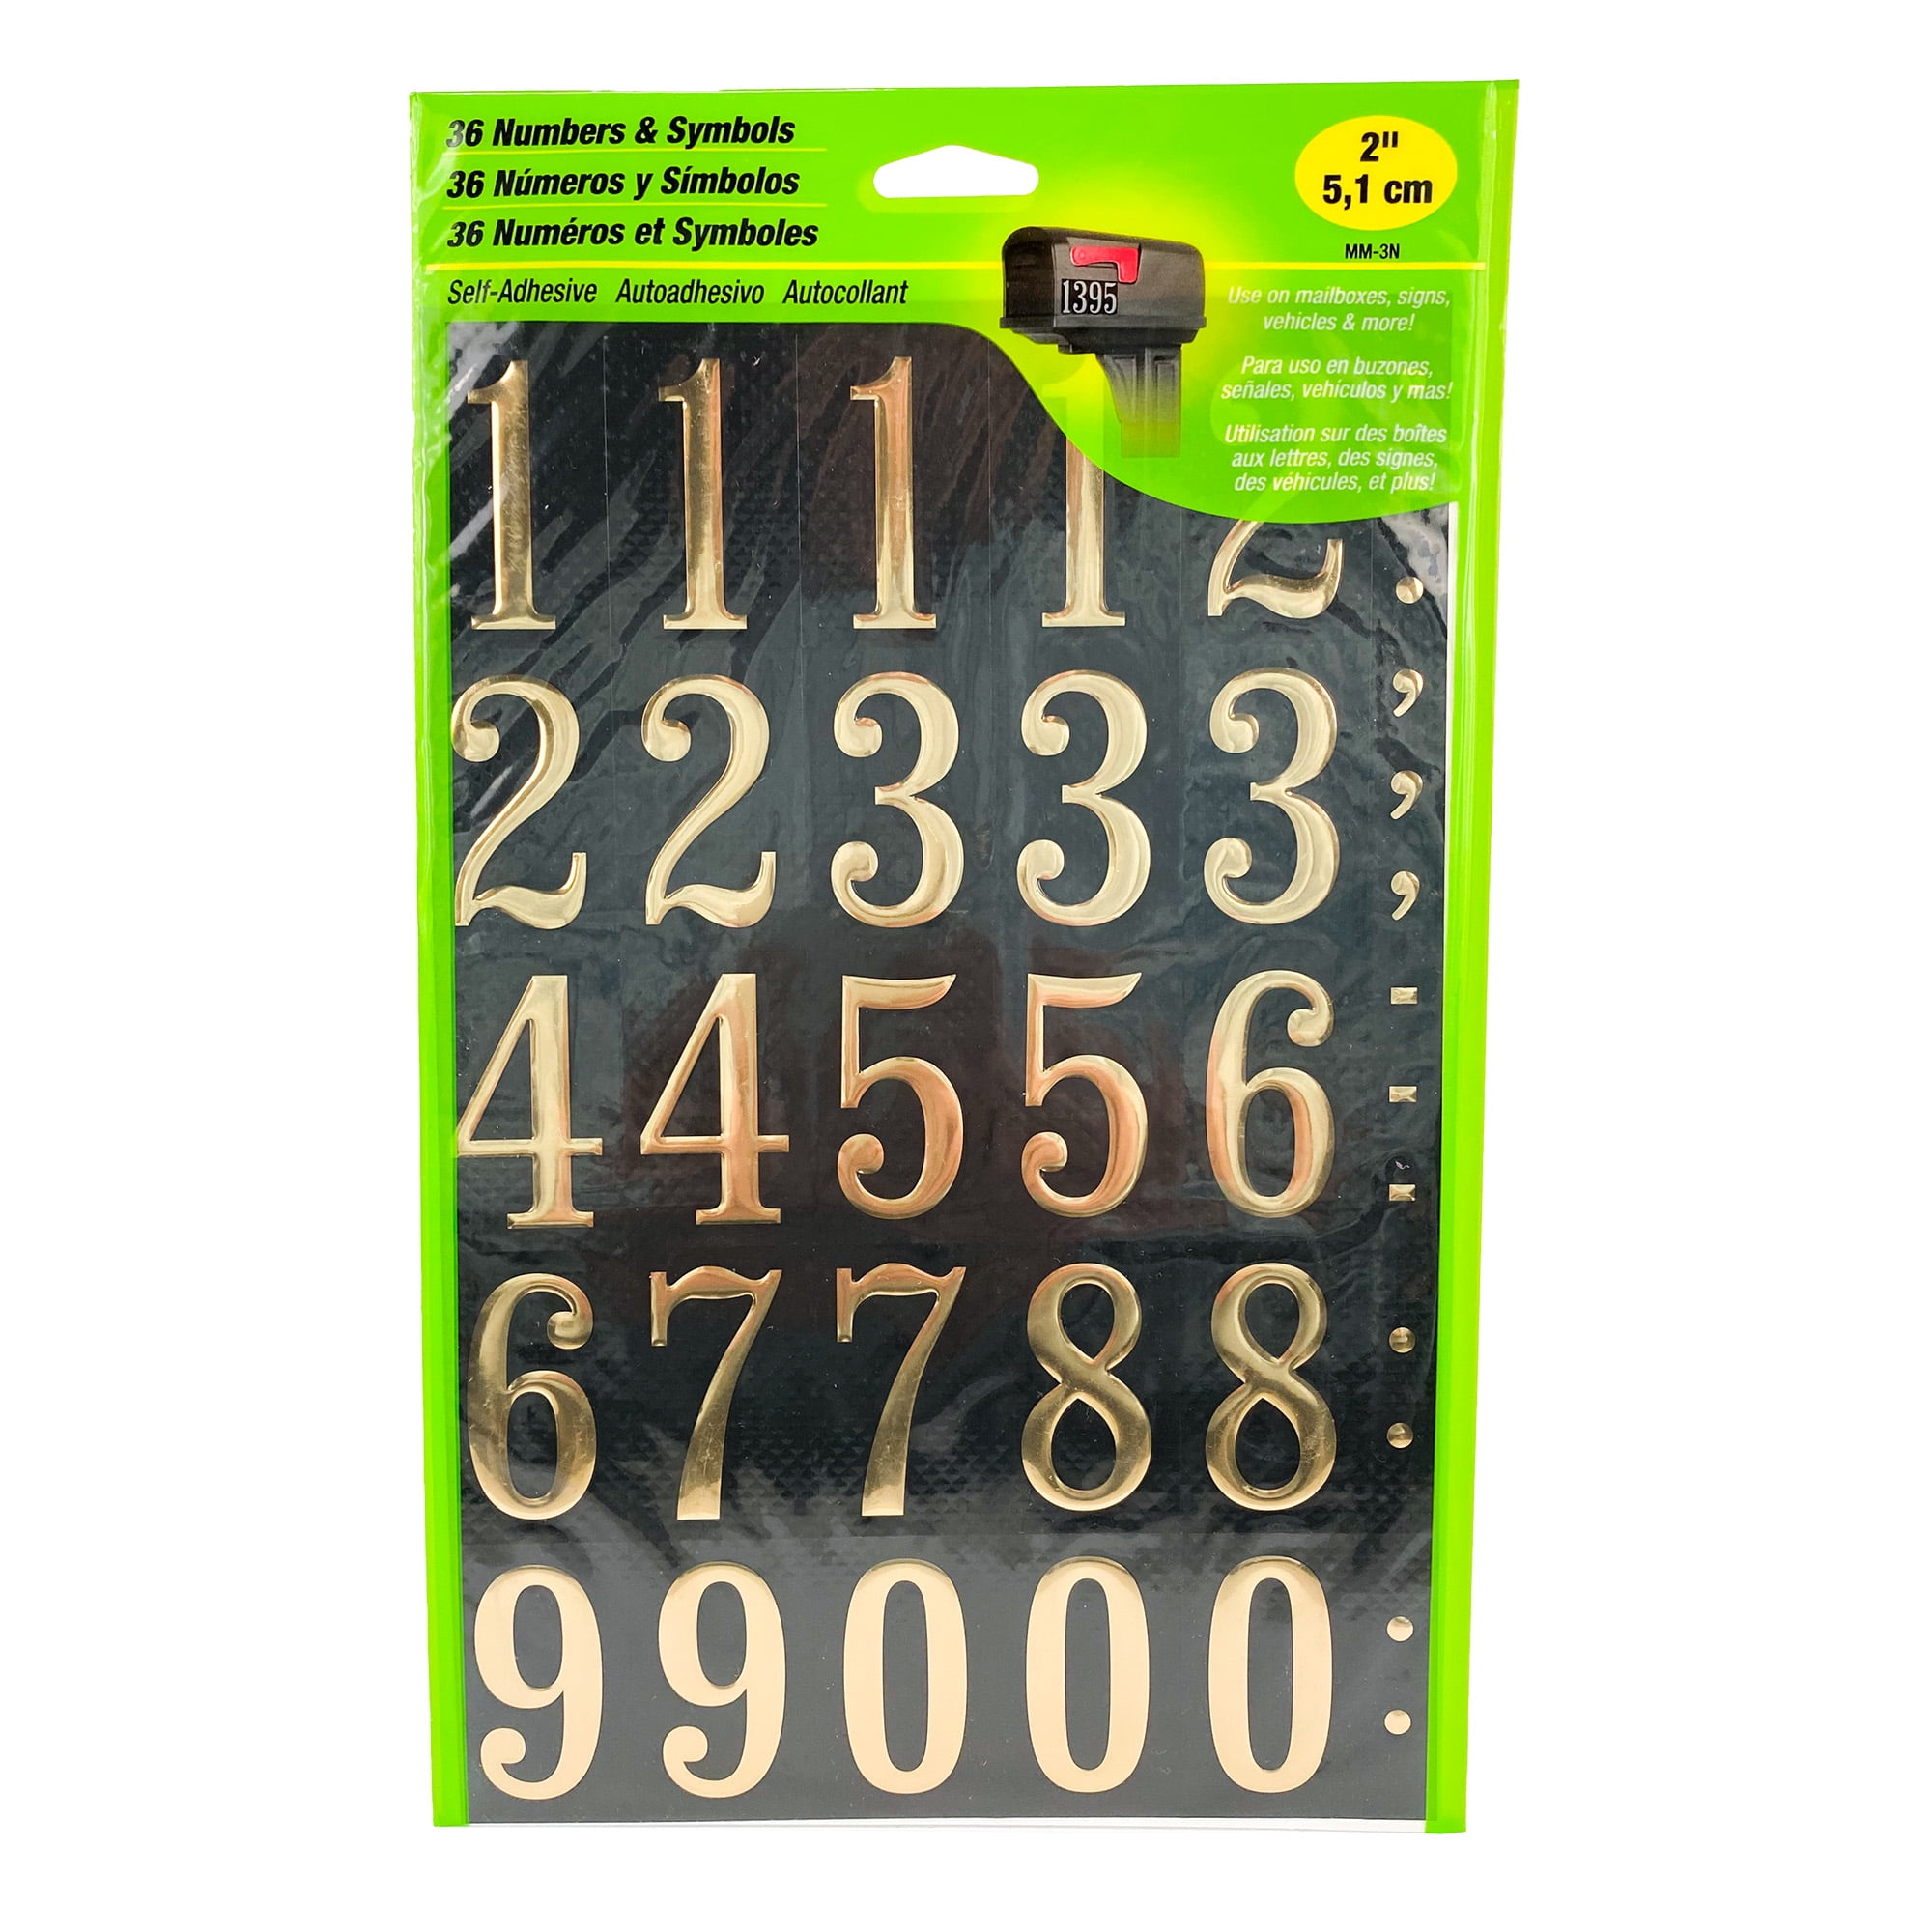 GLOSS BLACK VINYL SELF ADHESIVE LETTERS AND NUMBERS LABEL CODE DIY 25mm 1inch 